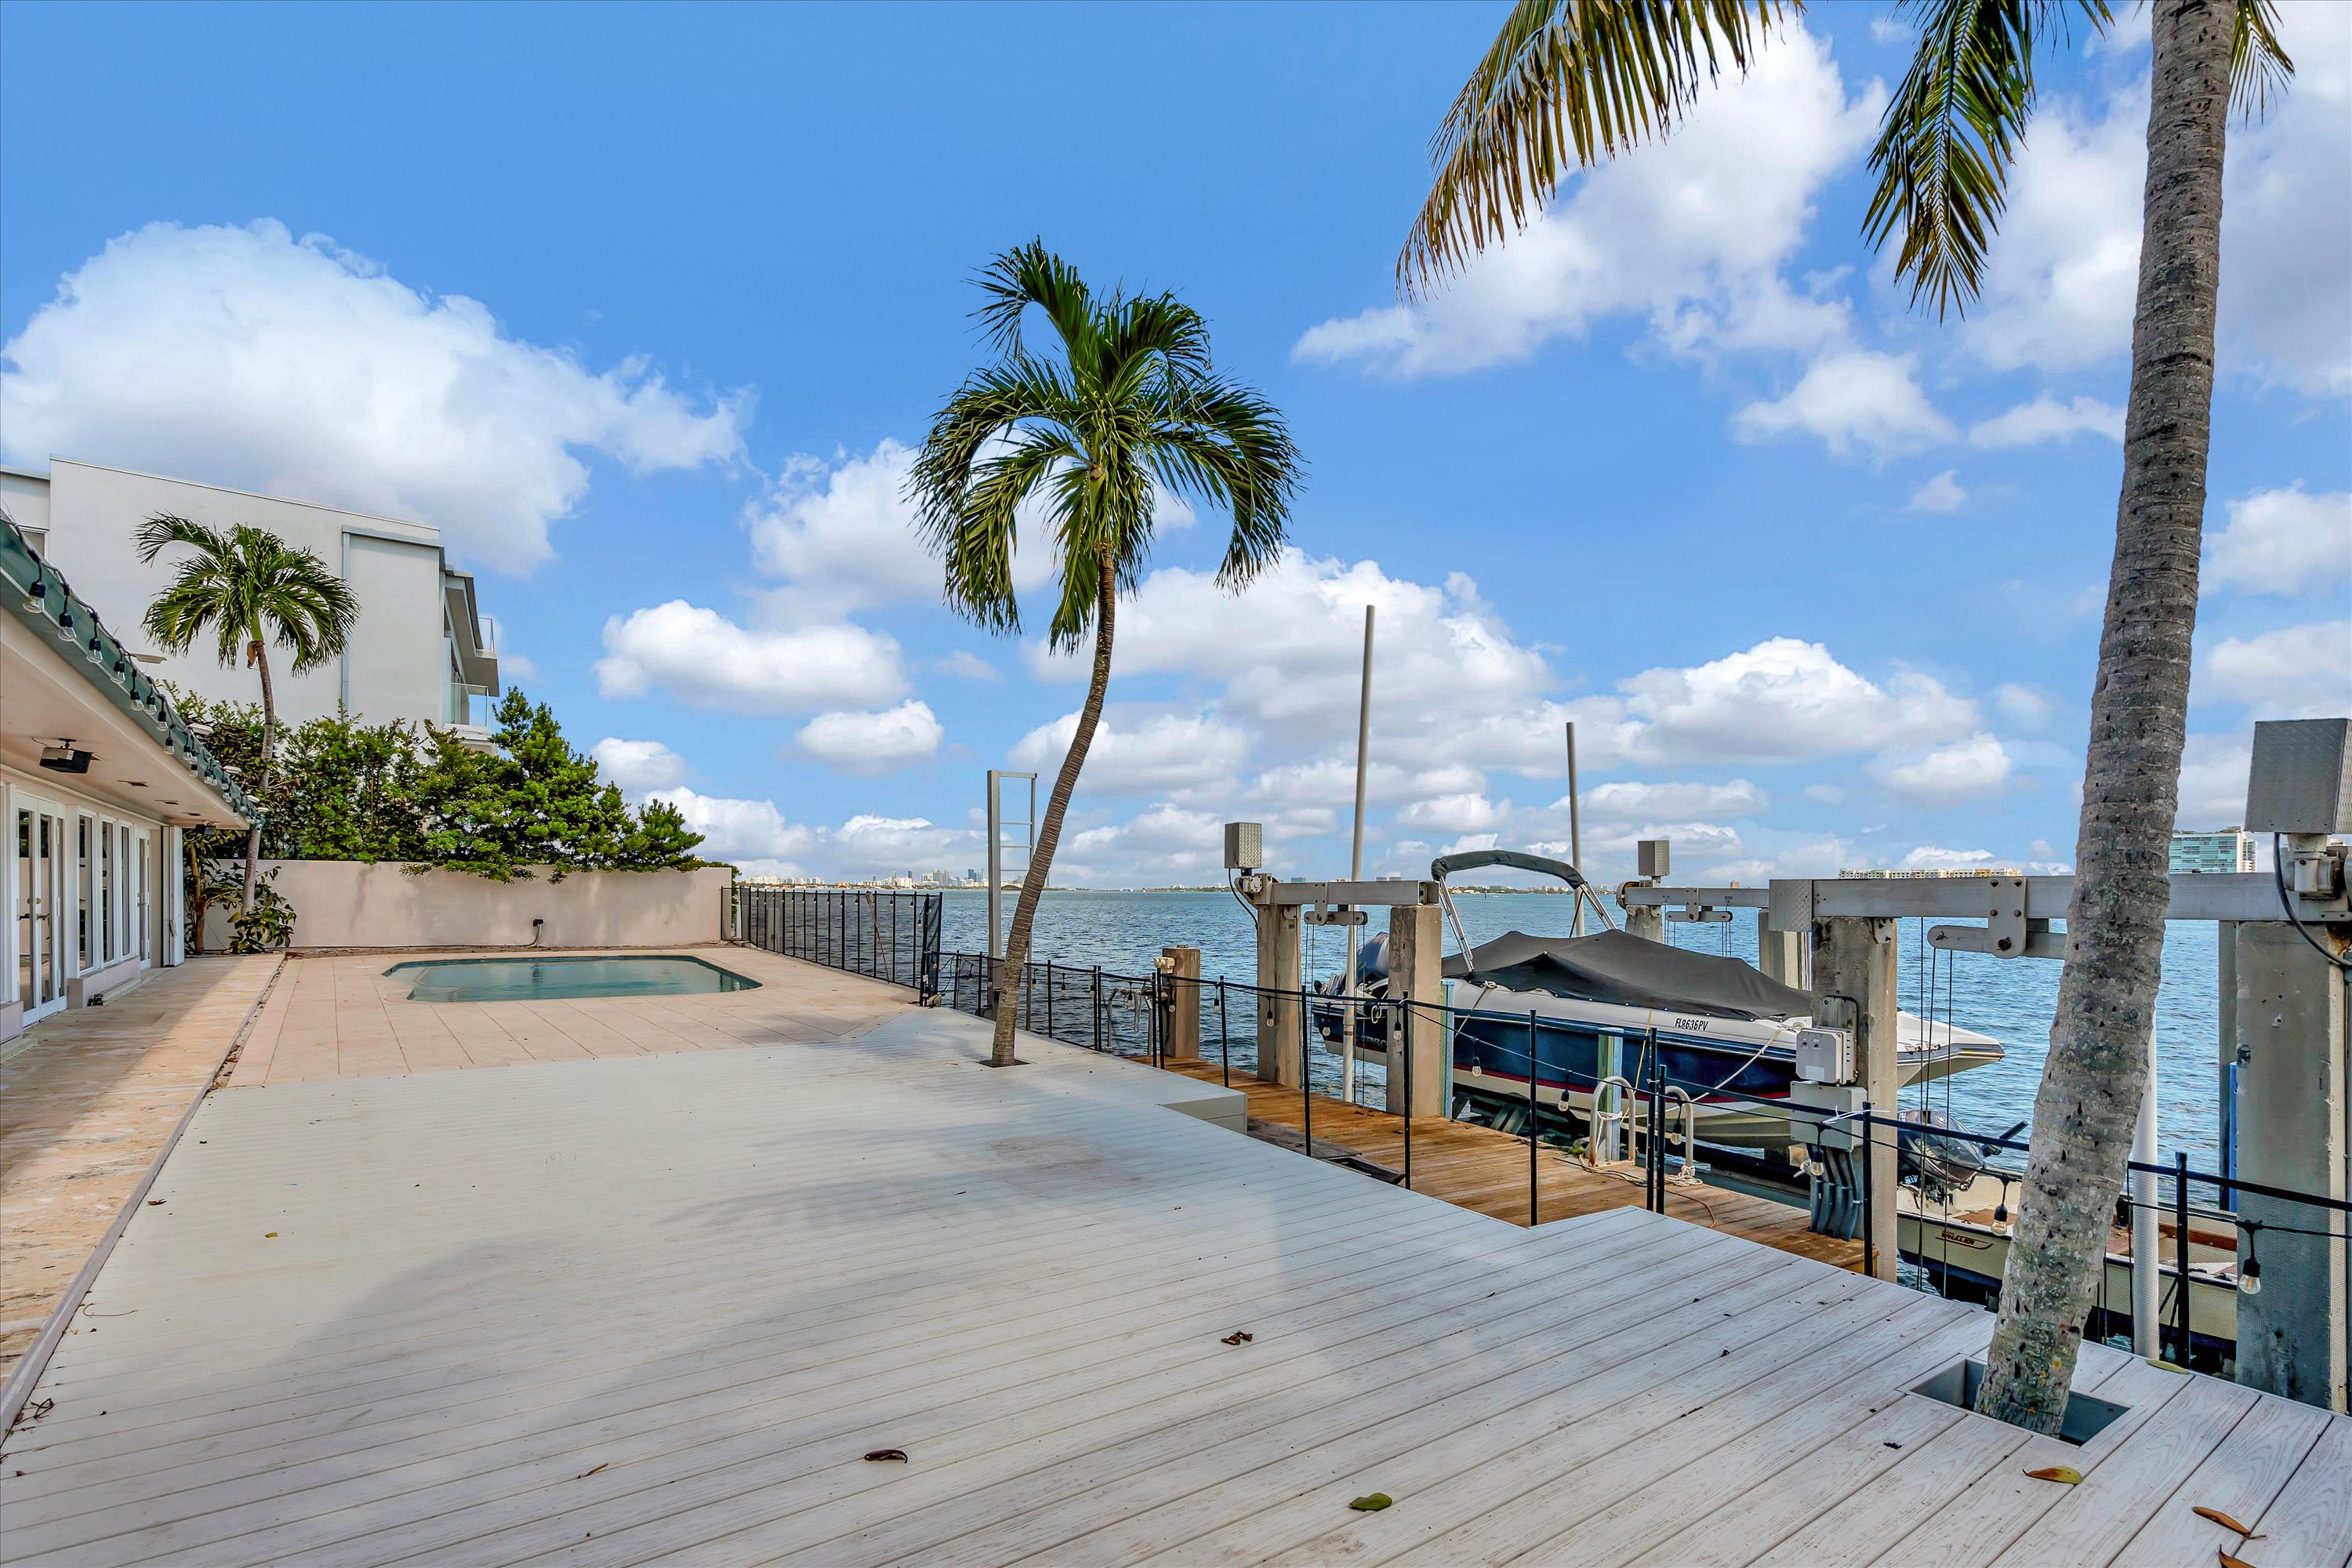 Beautiful Biscayne Island, Miami, FL house showcasing the best property management services